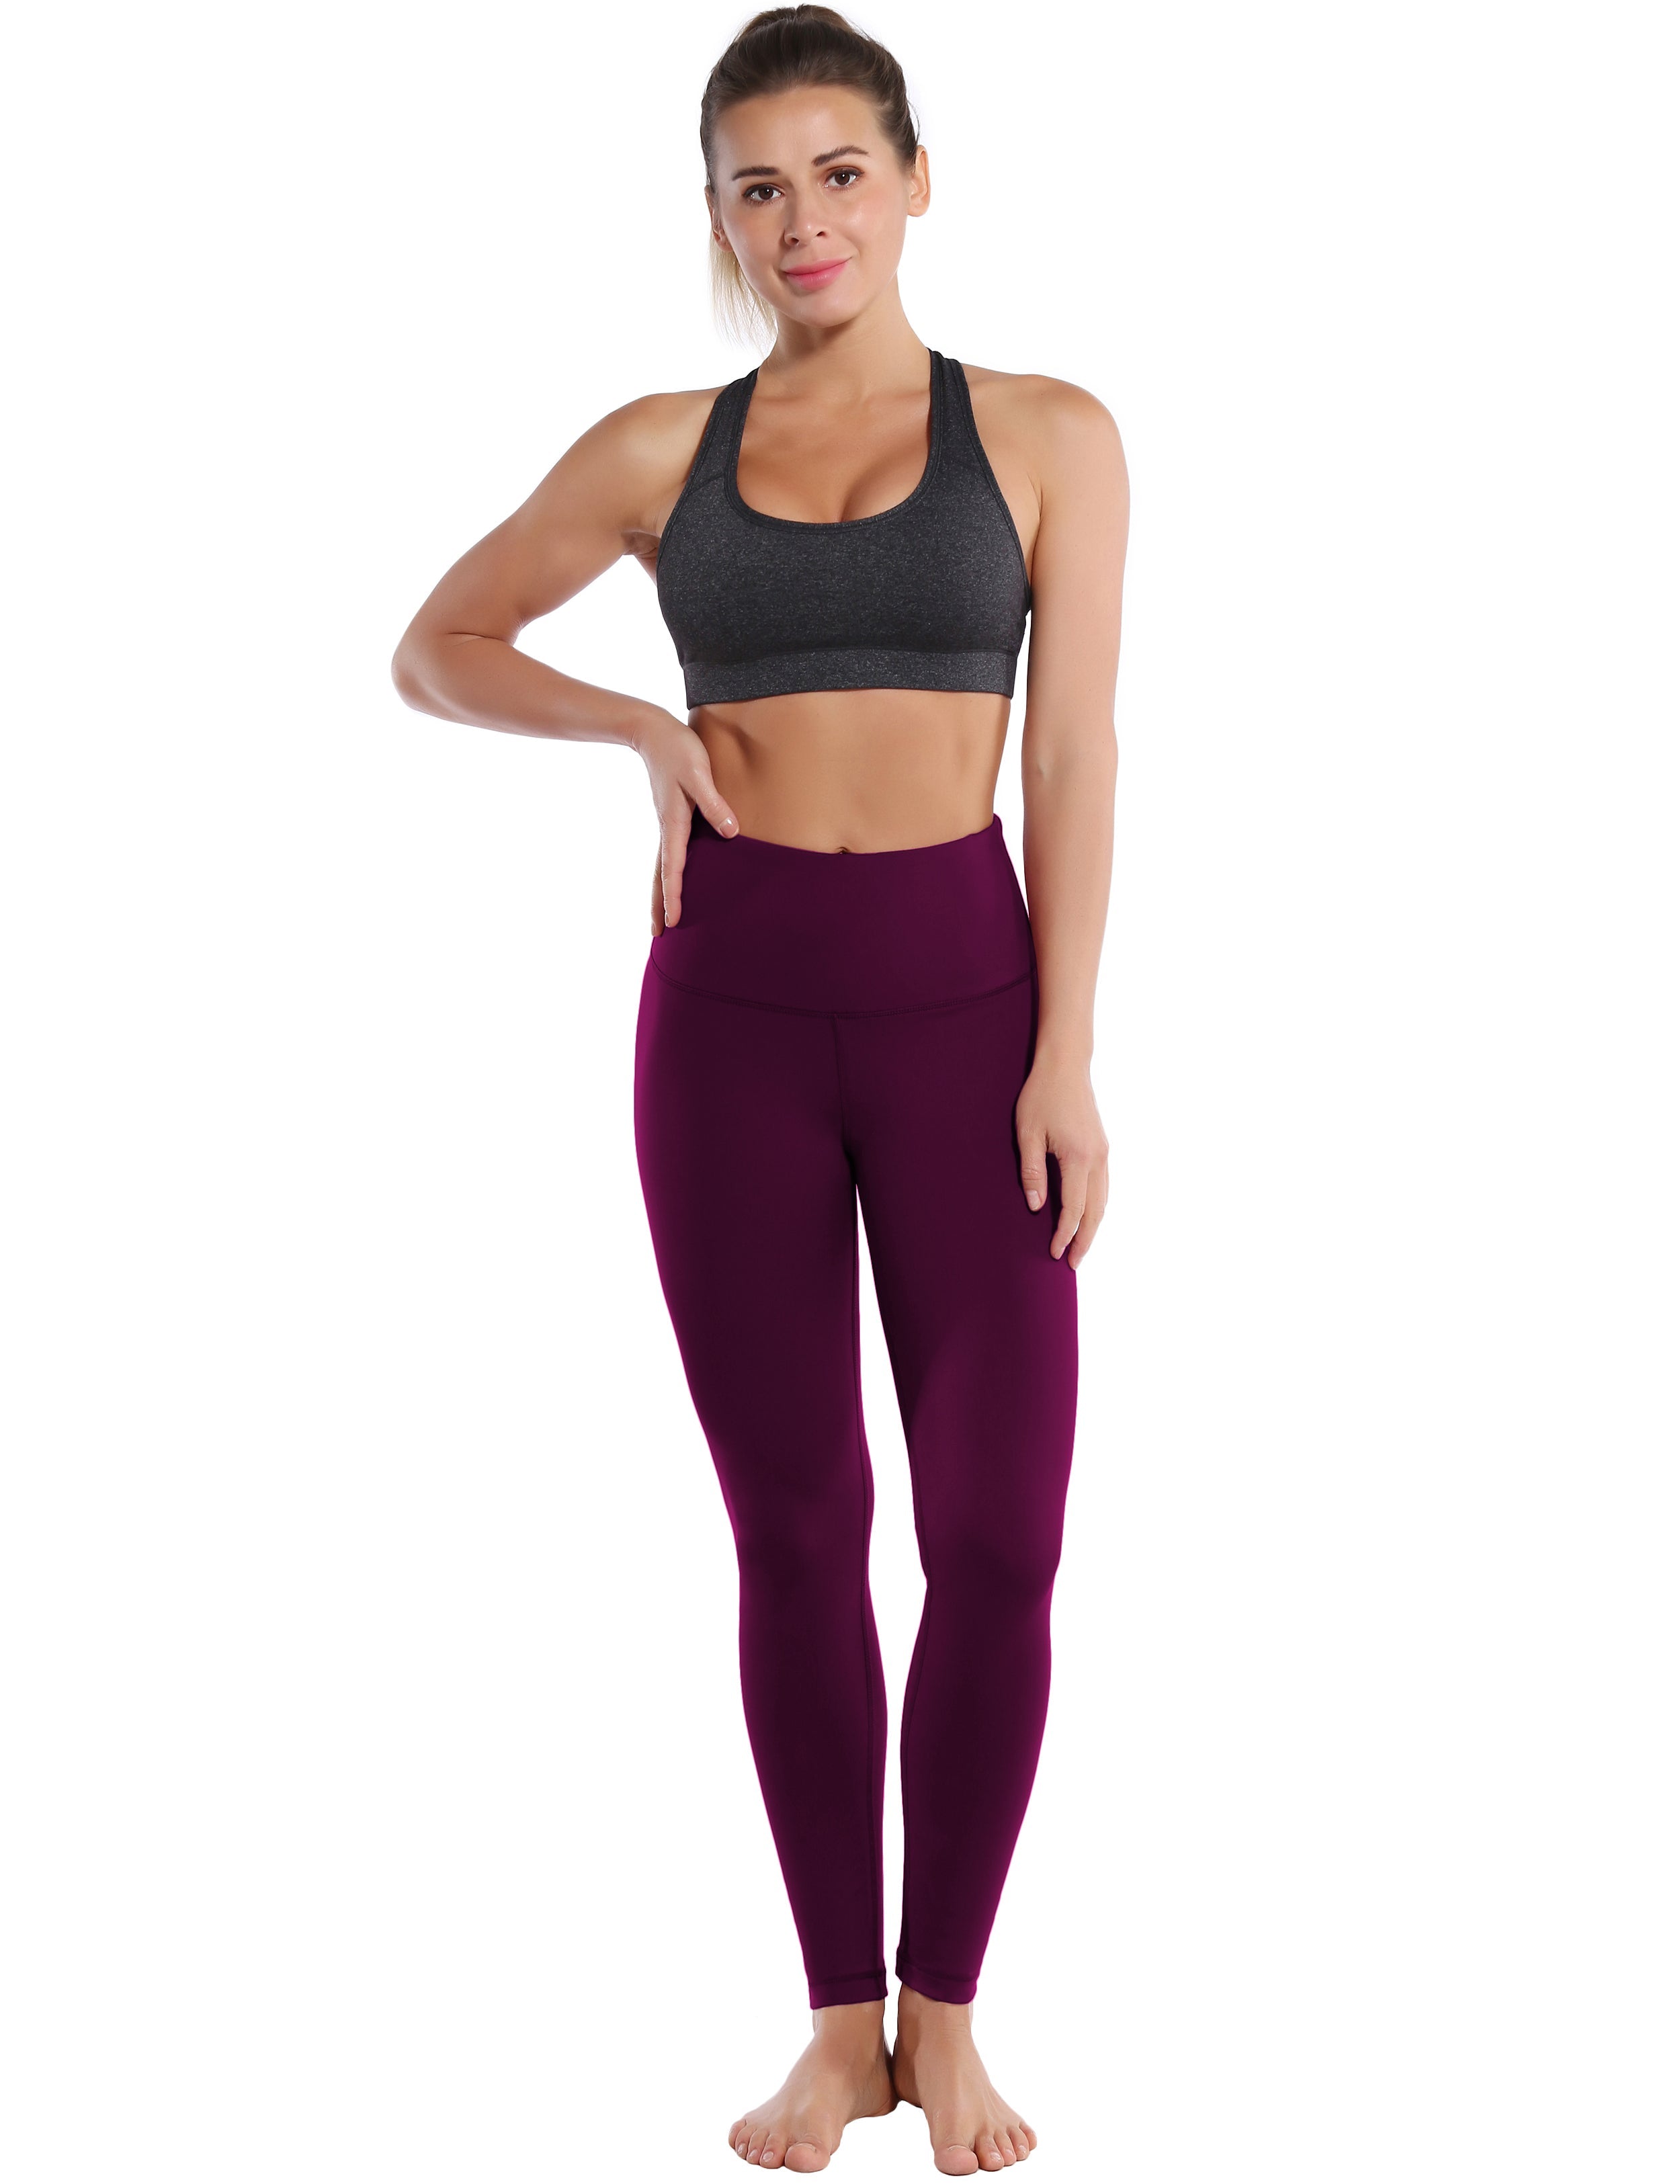 High Waist Jogging Pants grapevine 75%Nylon/25%Spandex Fabric doesn't attract lint easily 4-way stretch No see-through Moisture-wicking Tummy control Inner pocket Four lengths